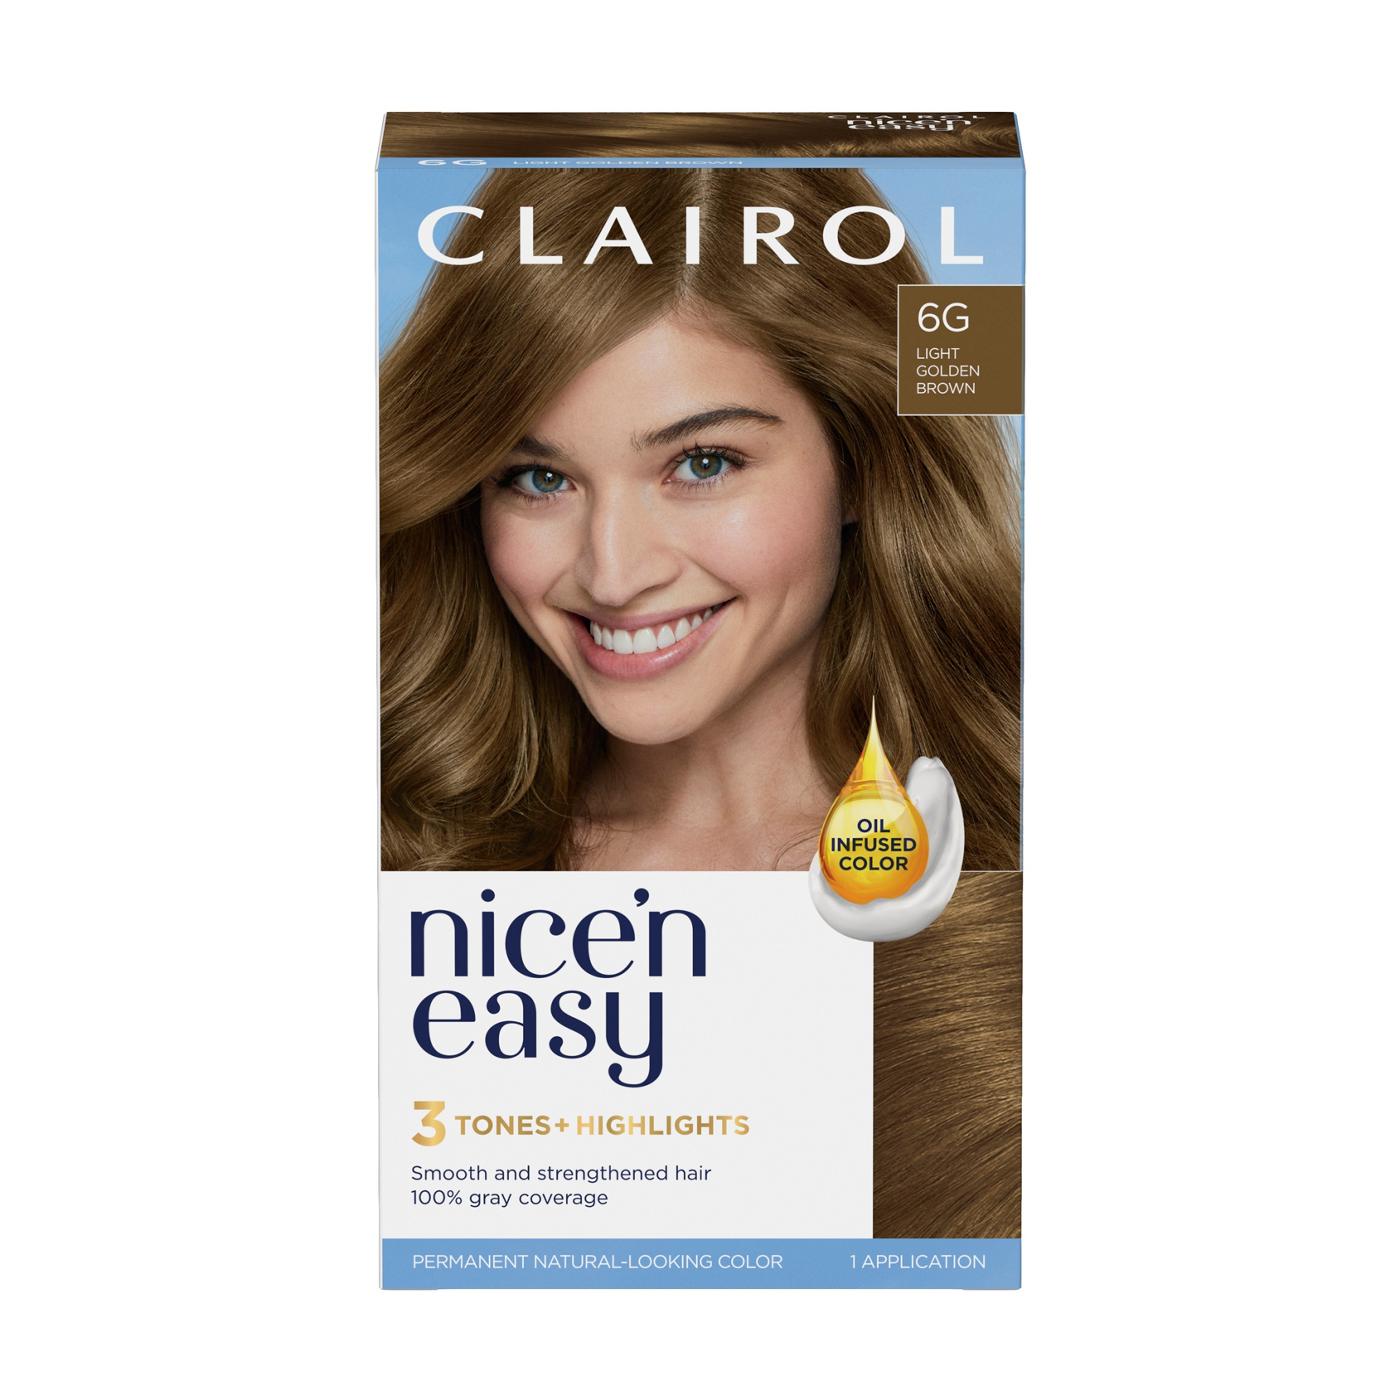 Clairol Nice 'N Easy Permanent Hair Color - 6G Light Golden Brown; image 1 of 10